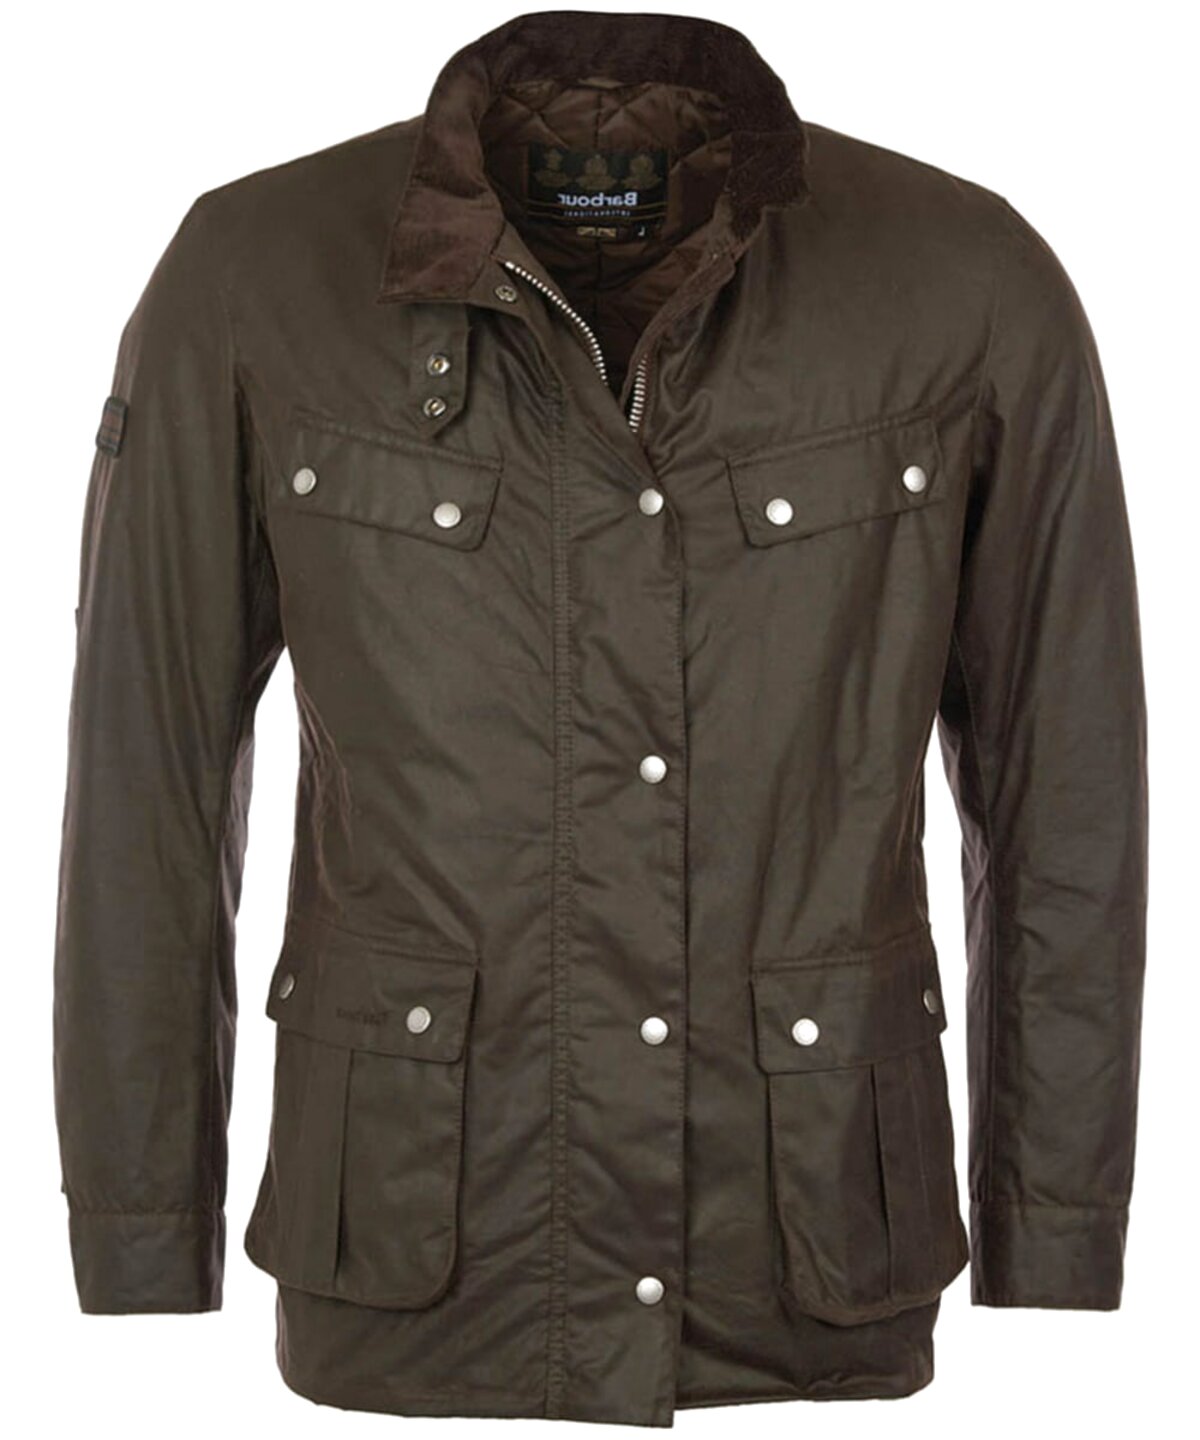 Mens Barbour Wax Jacket Xl for sale in UK | 61 used Mens Barbour Wax ...